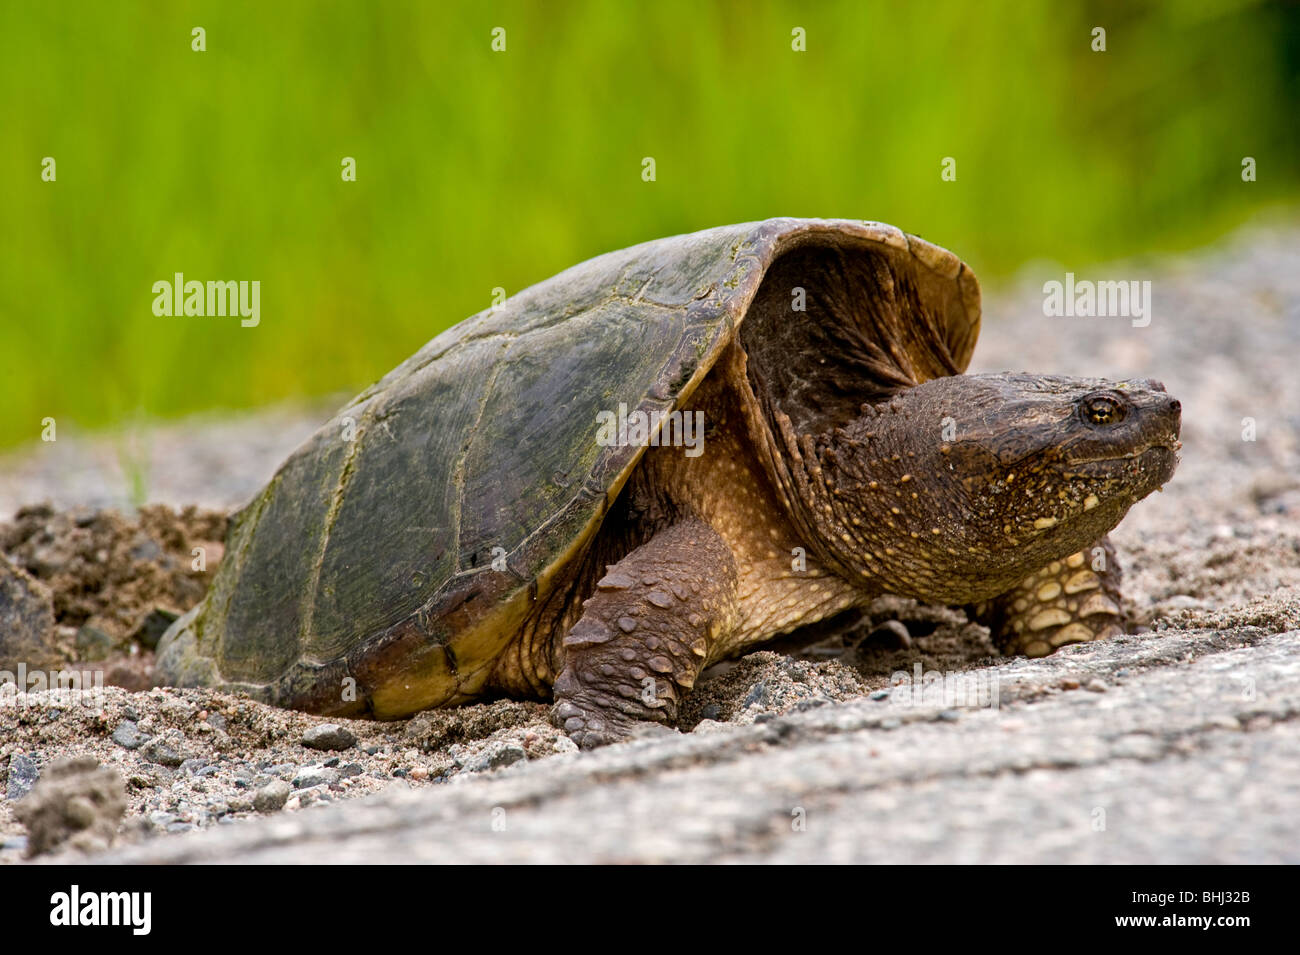 Snapping turtle (Chelydra serpentina) Female laying eggs in roadside gravel, Greater Sudbury, Ontario, Canada Stock Photo